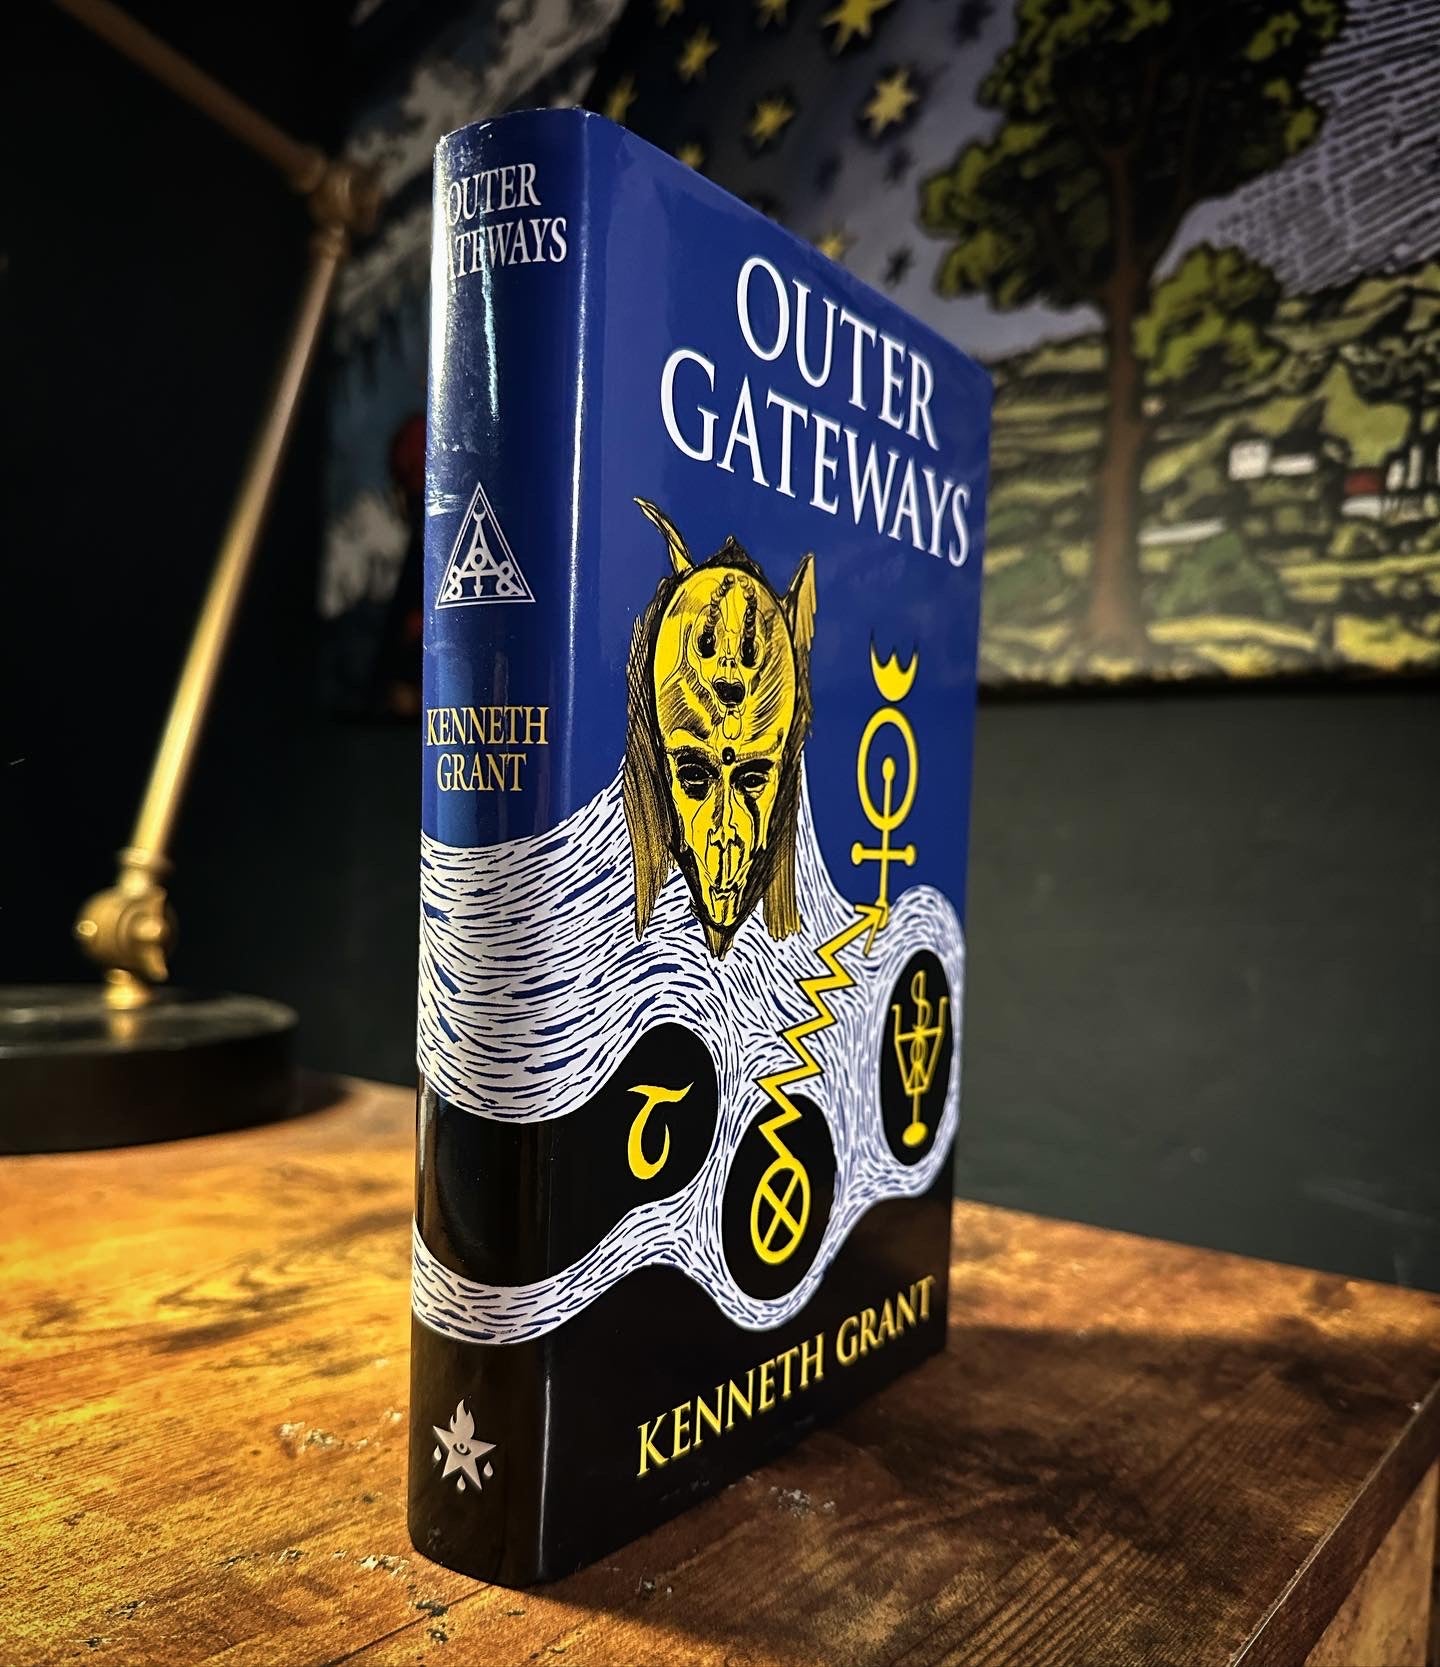 Outer Gateways by Kenneth Grant